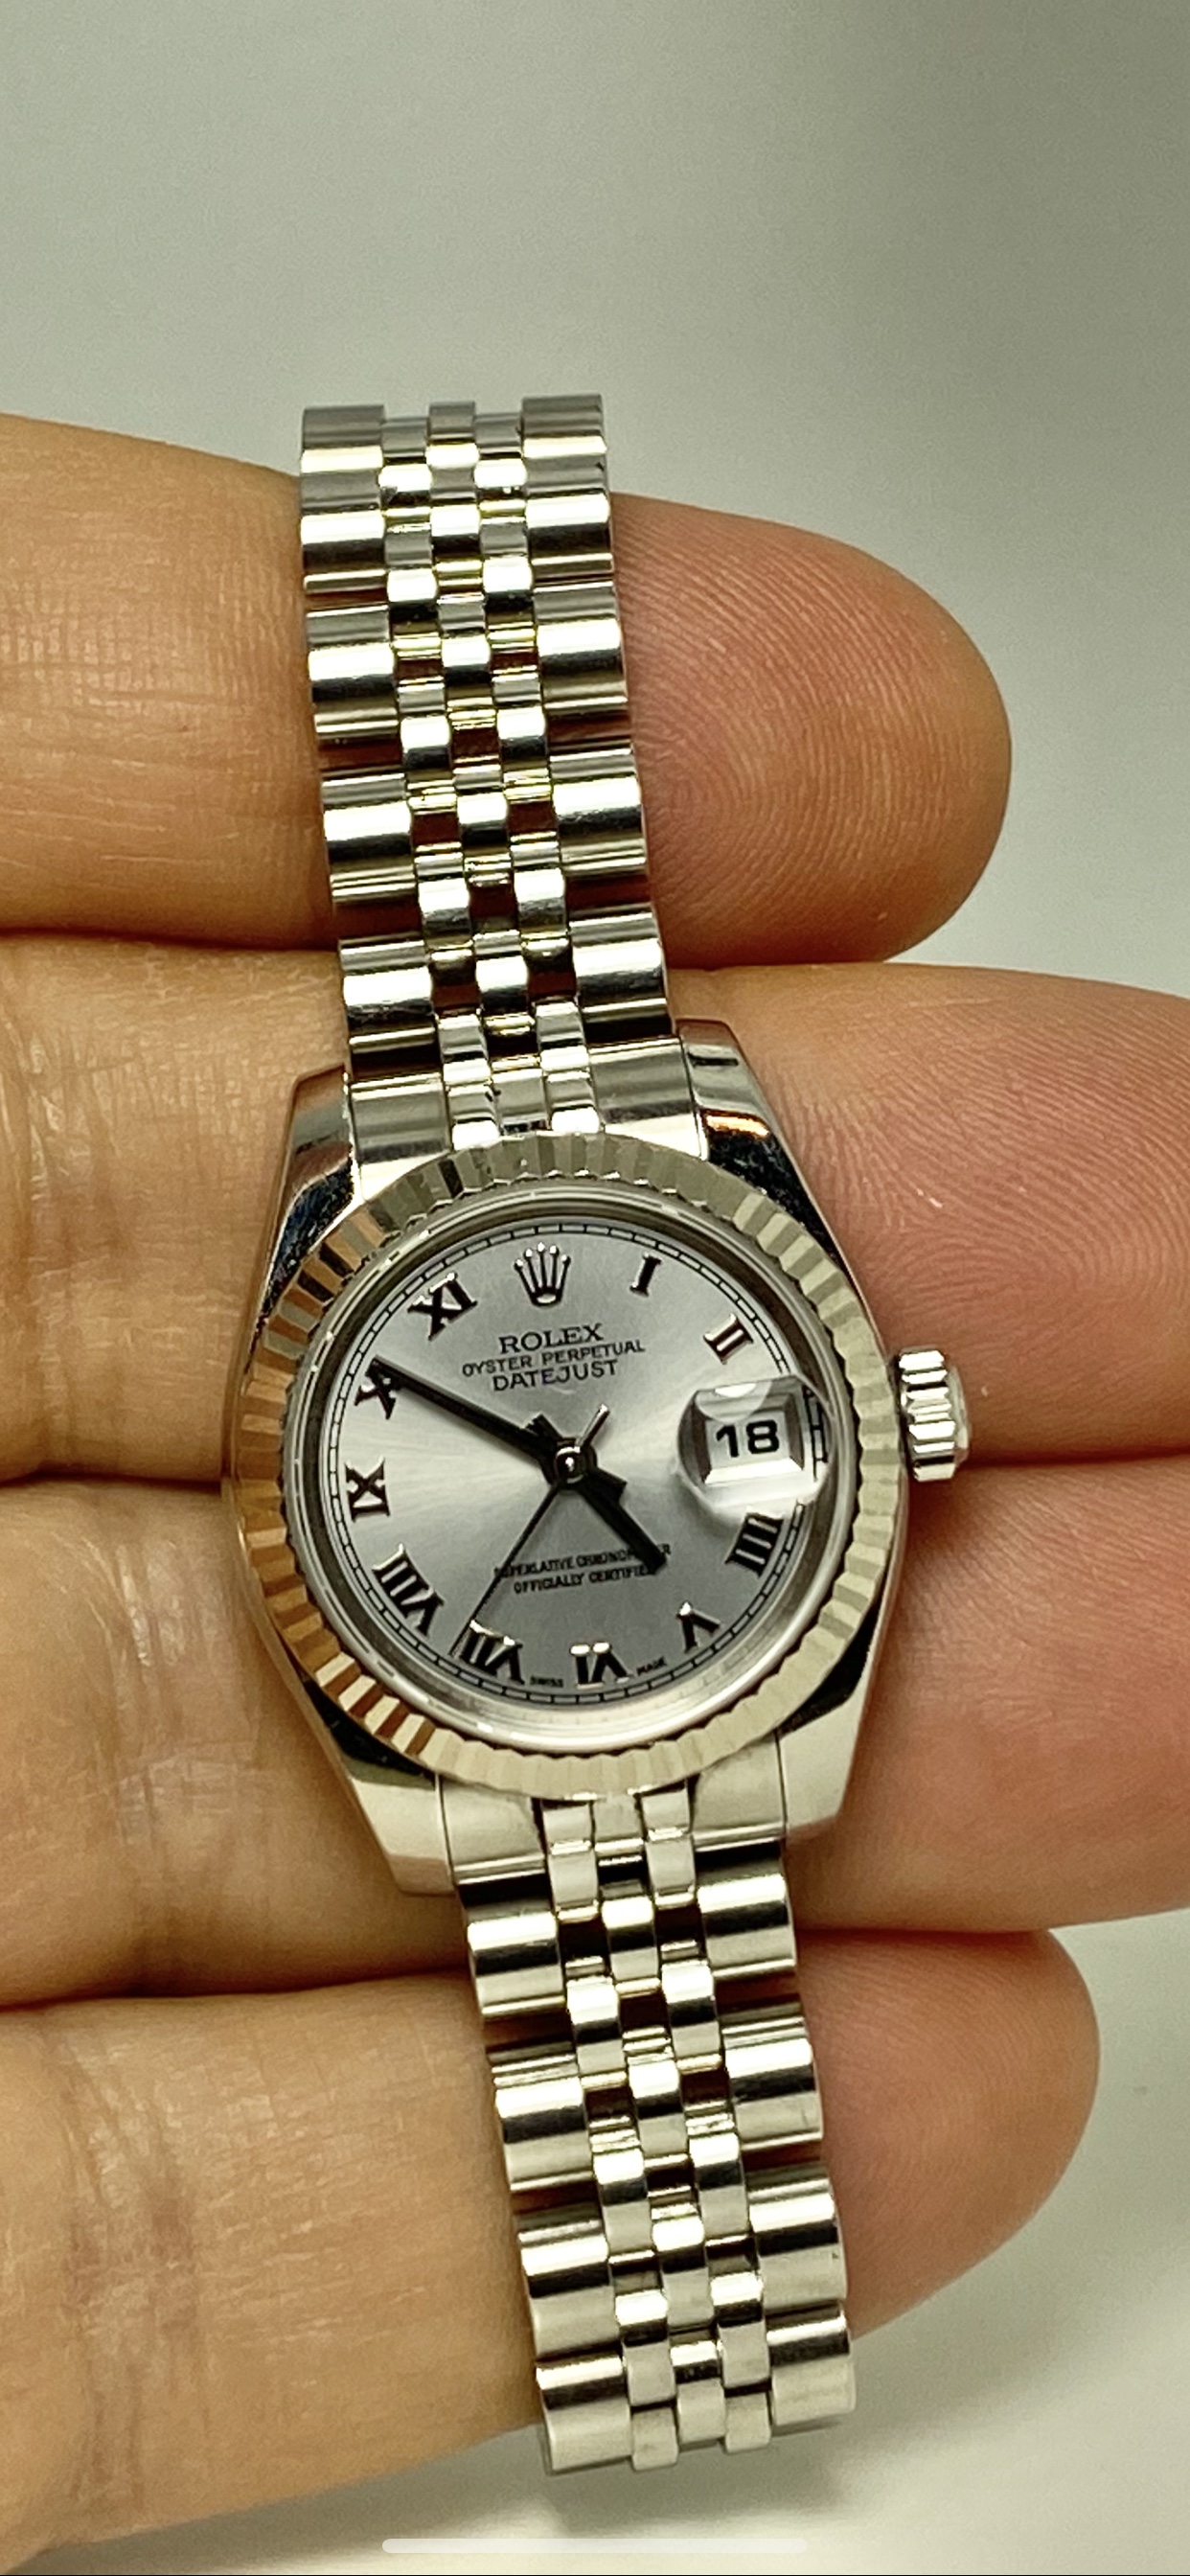 A look at TopNotch Watch's Datejust 36 watch.